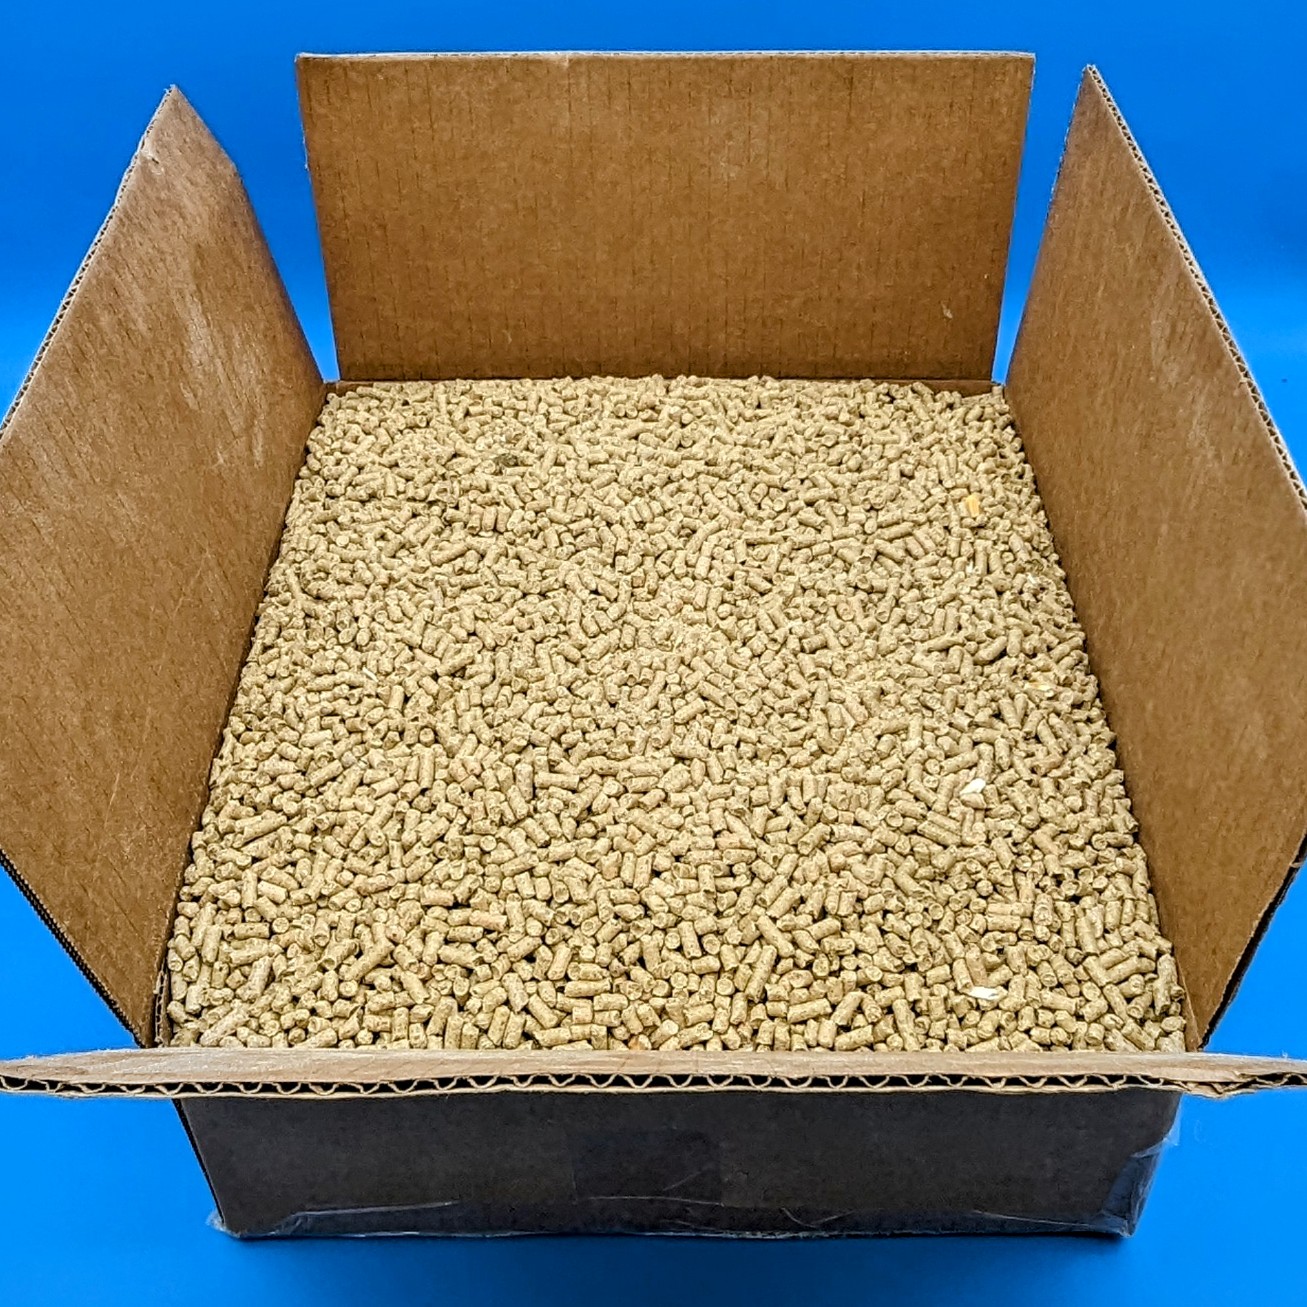 soy hull pellets in a box for growing mushrooms